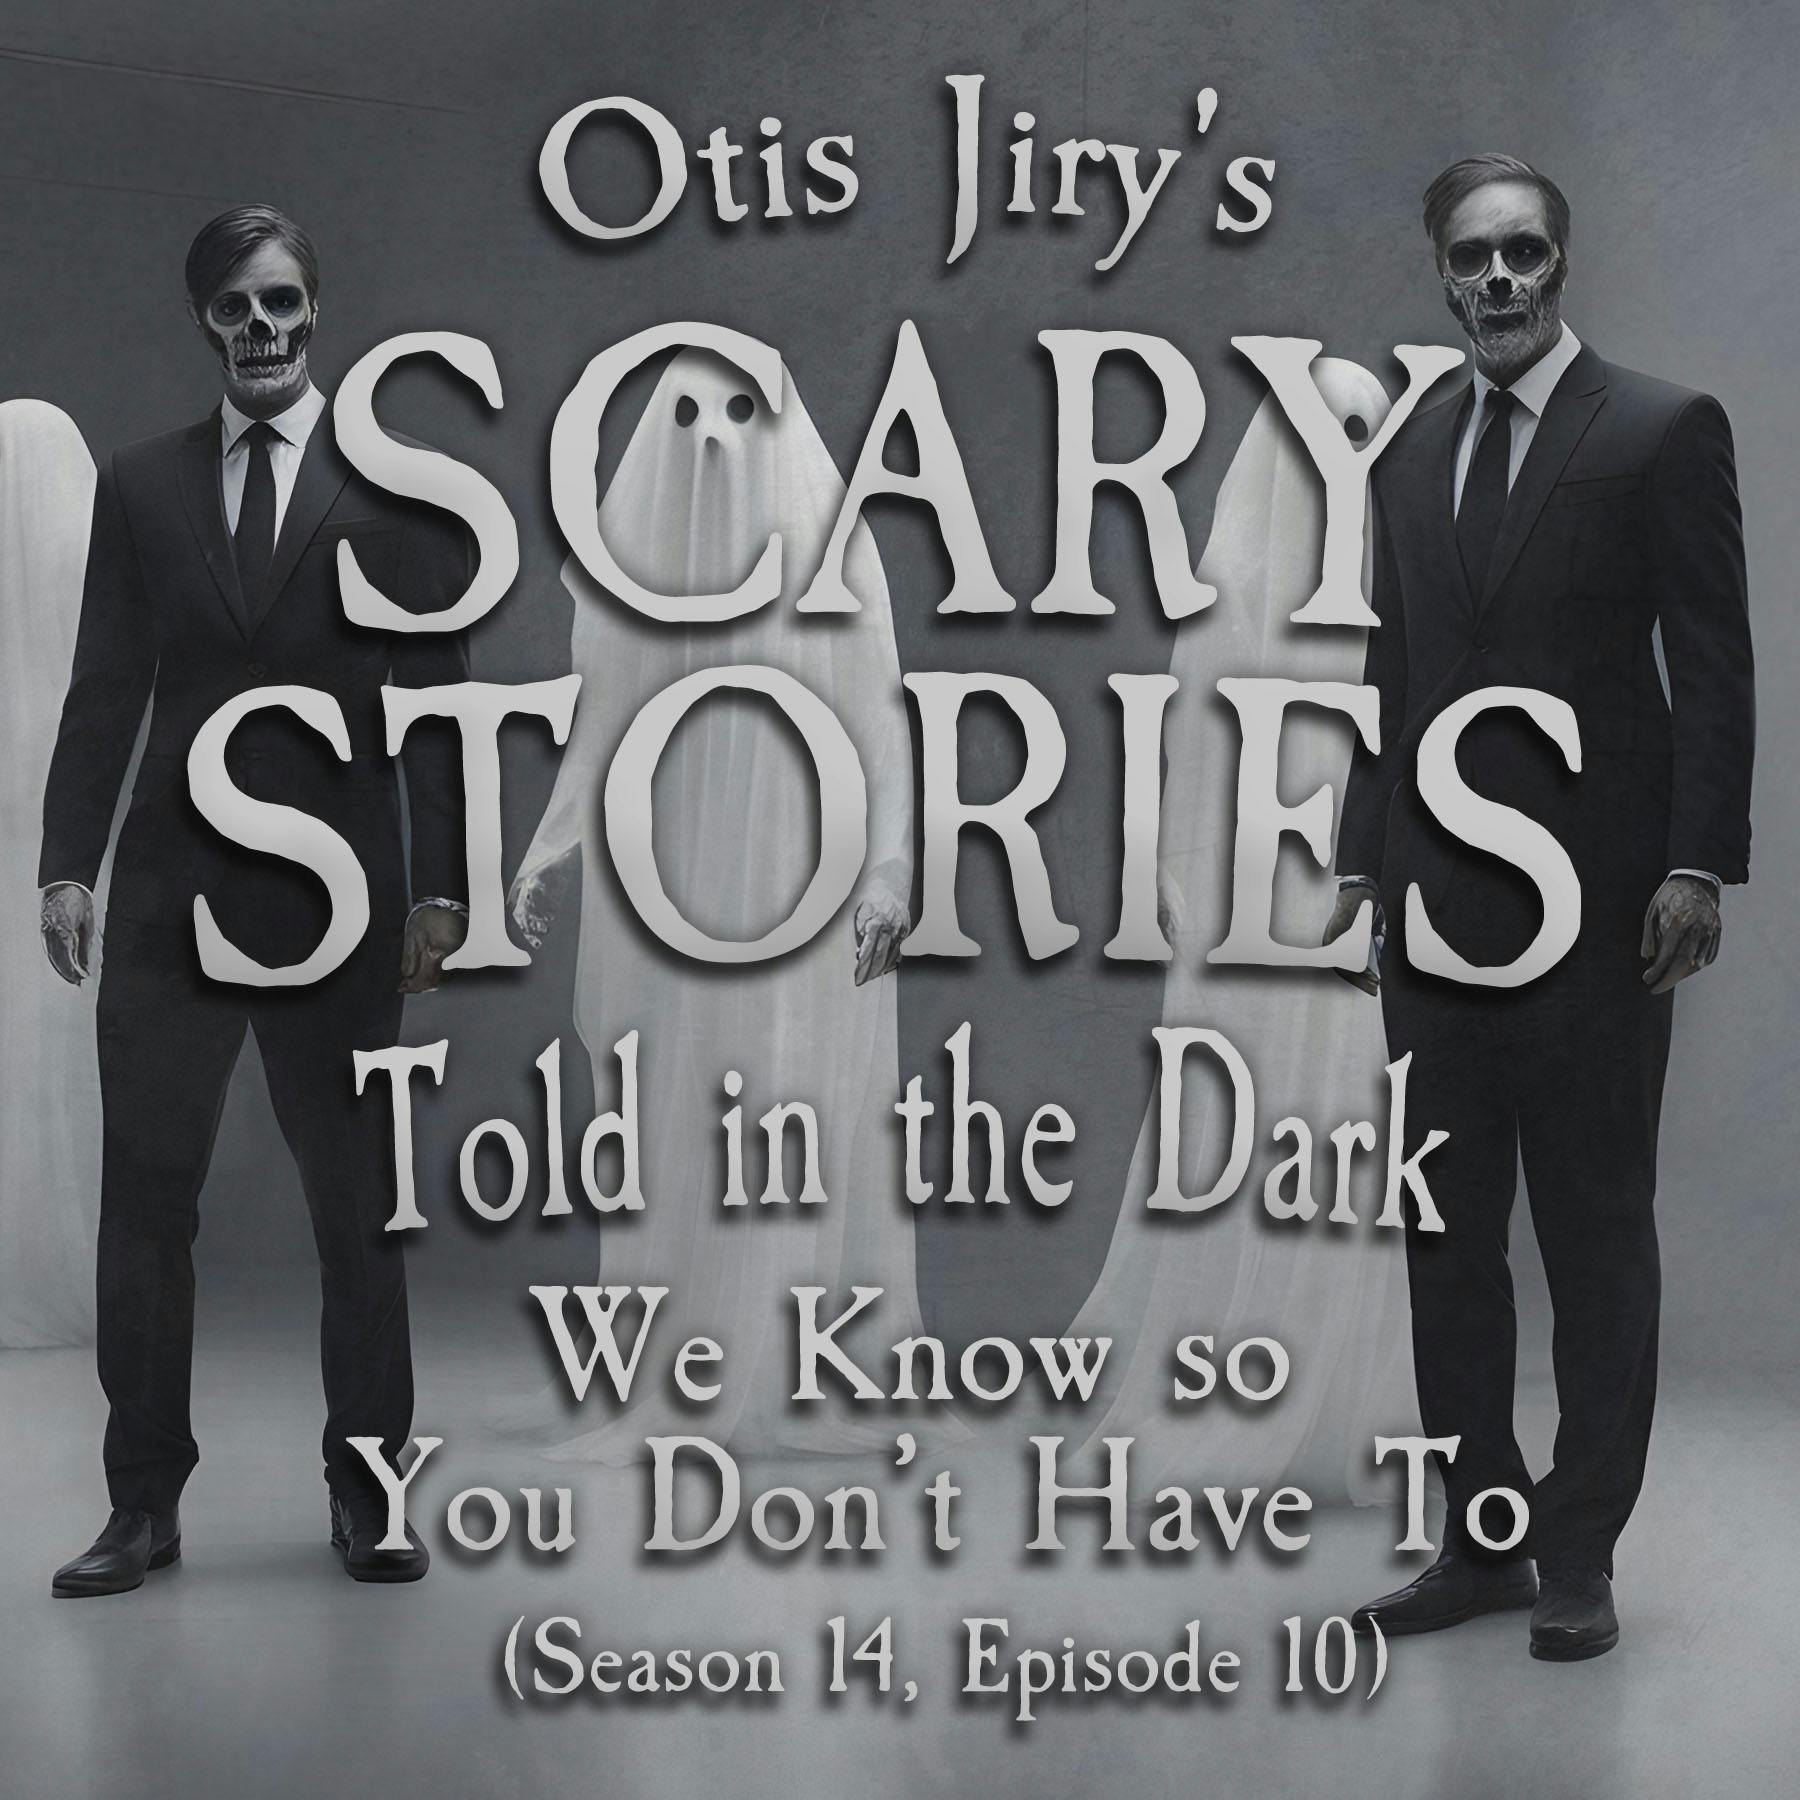 S14E11 - "We Know So You Don't Have To" – Scary Stories Told in the Dark